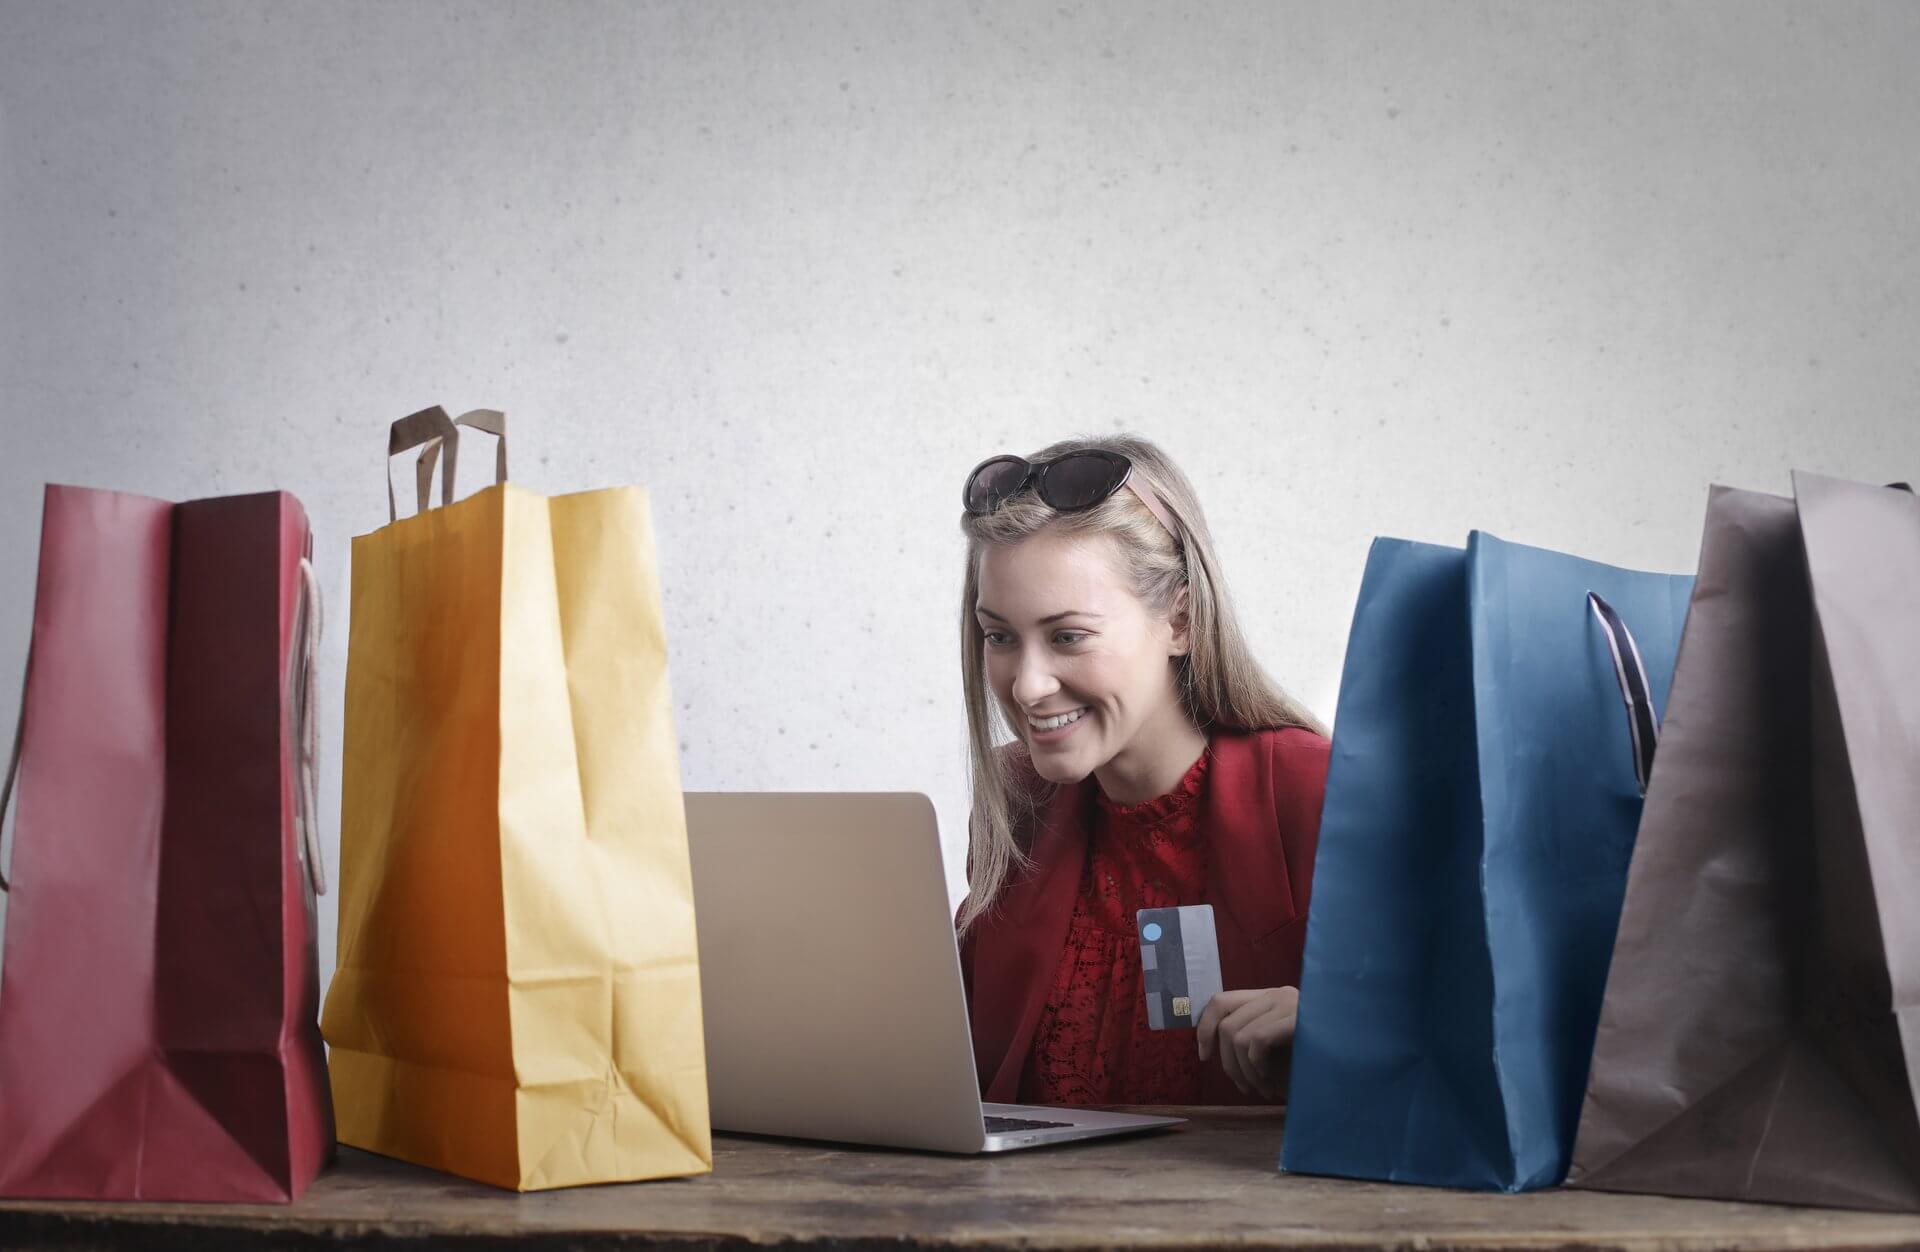 Happy woman sitting doing online shopping holding credit card with many shopping bags on table